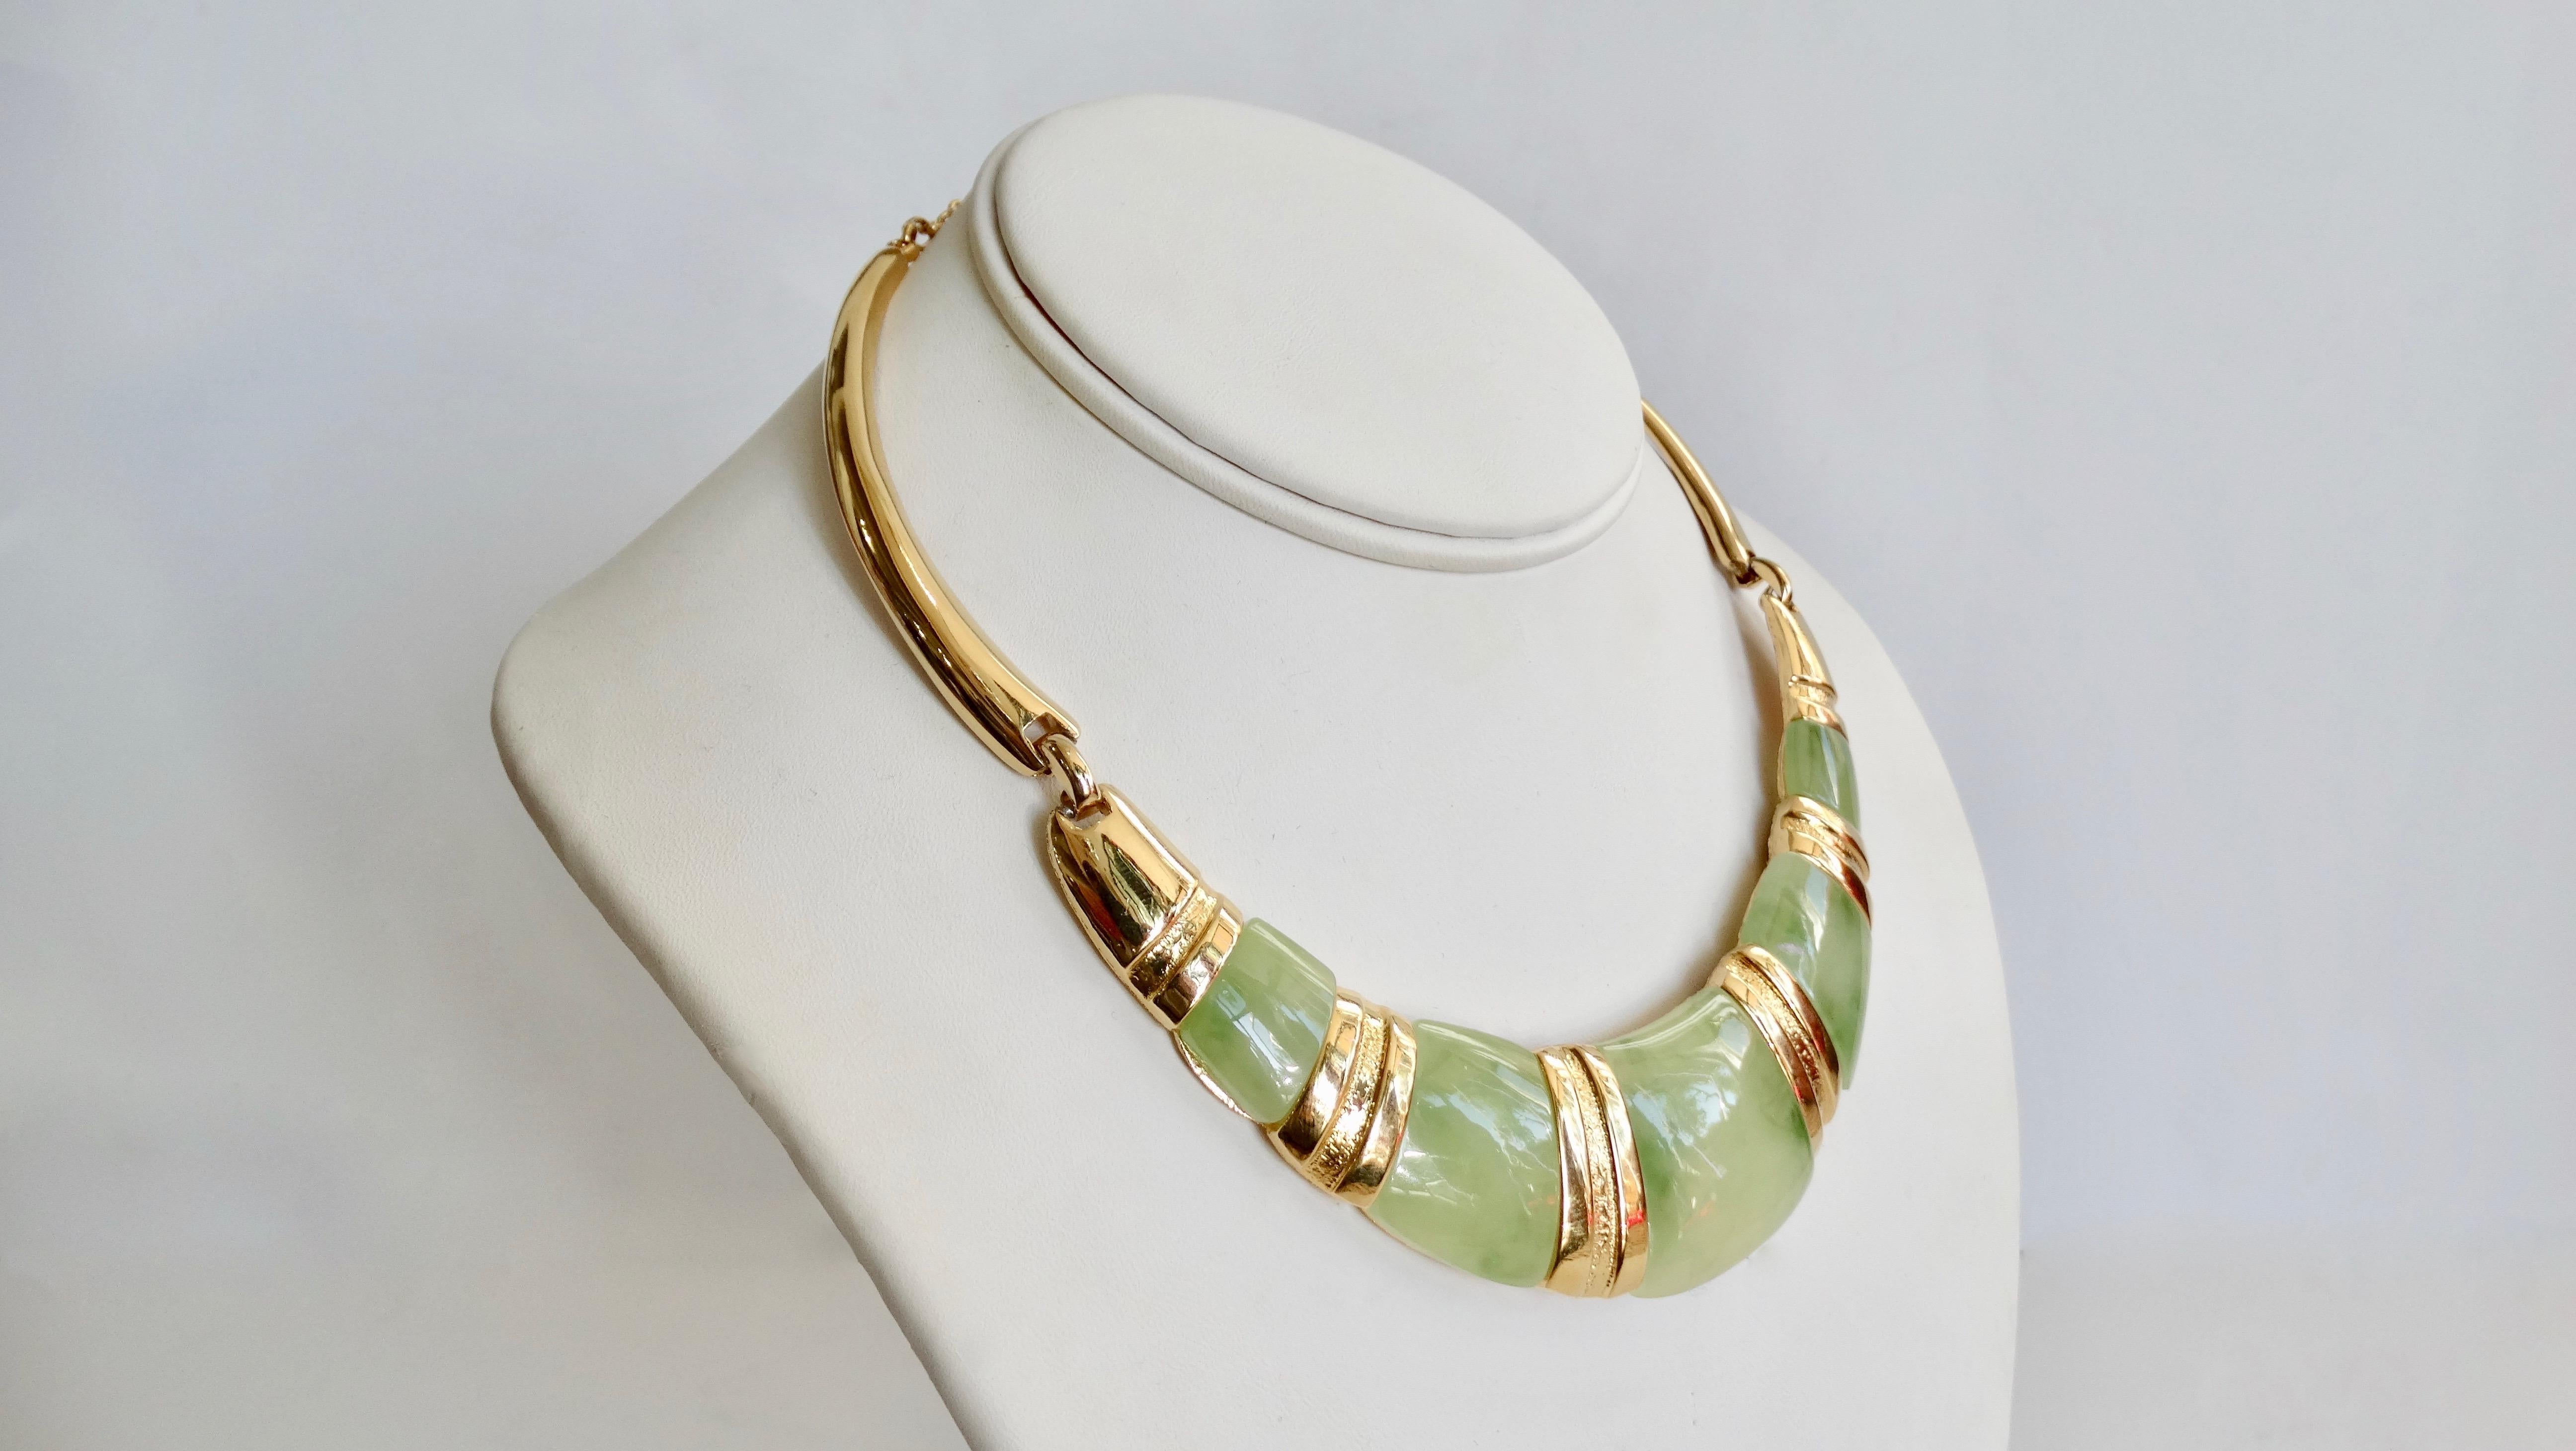 Elegance is key and this Pierre Cardin choker is the perfect piece! Circa 1970s, this choker is gold plated and features Jade stones separated with smooth and textured gold hardware. Adjustable hook closure with Pierre Cardin logo charm. Whether you